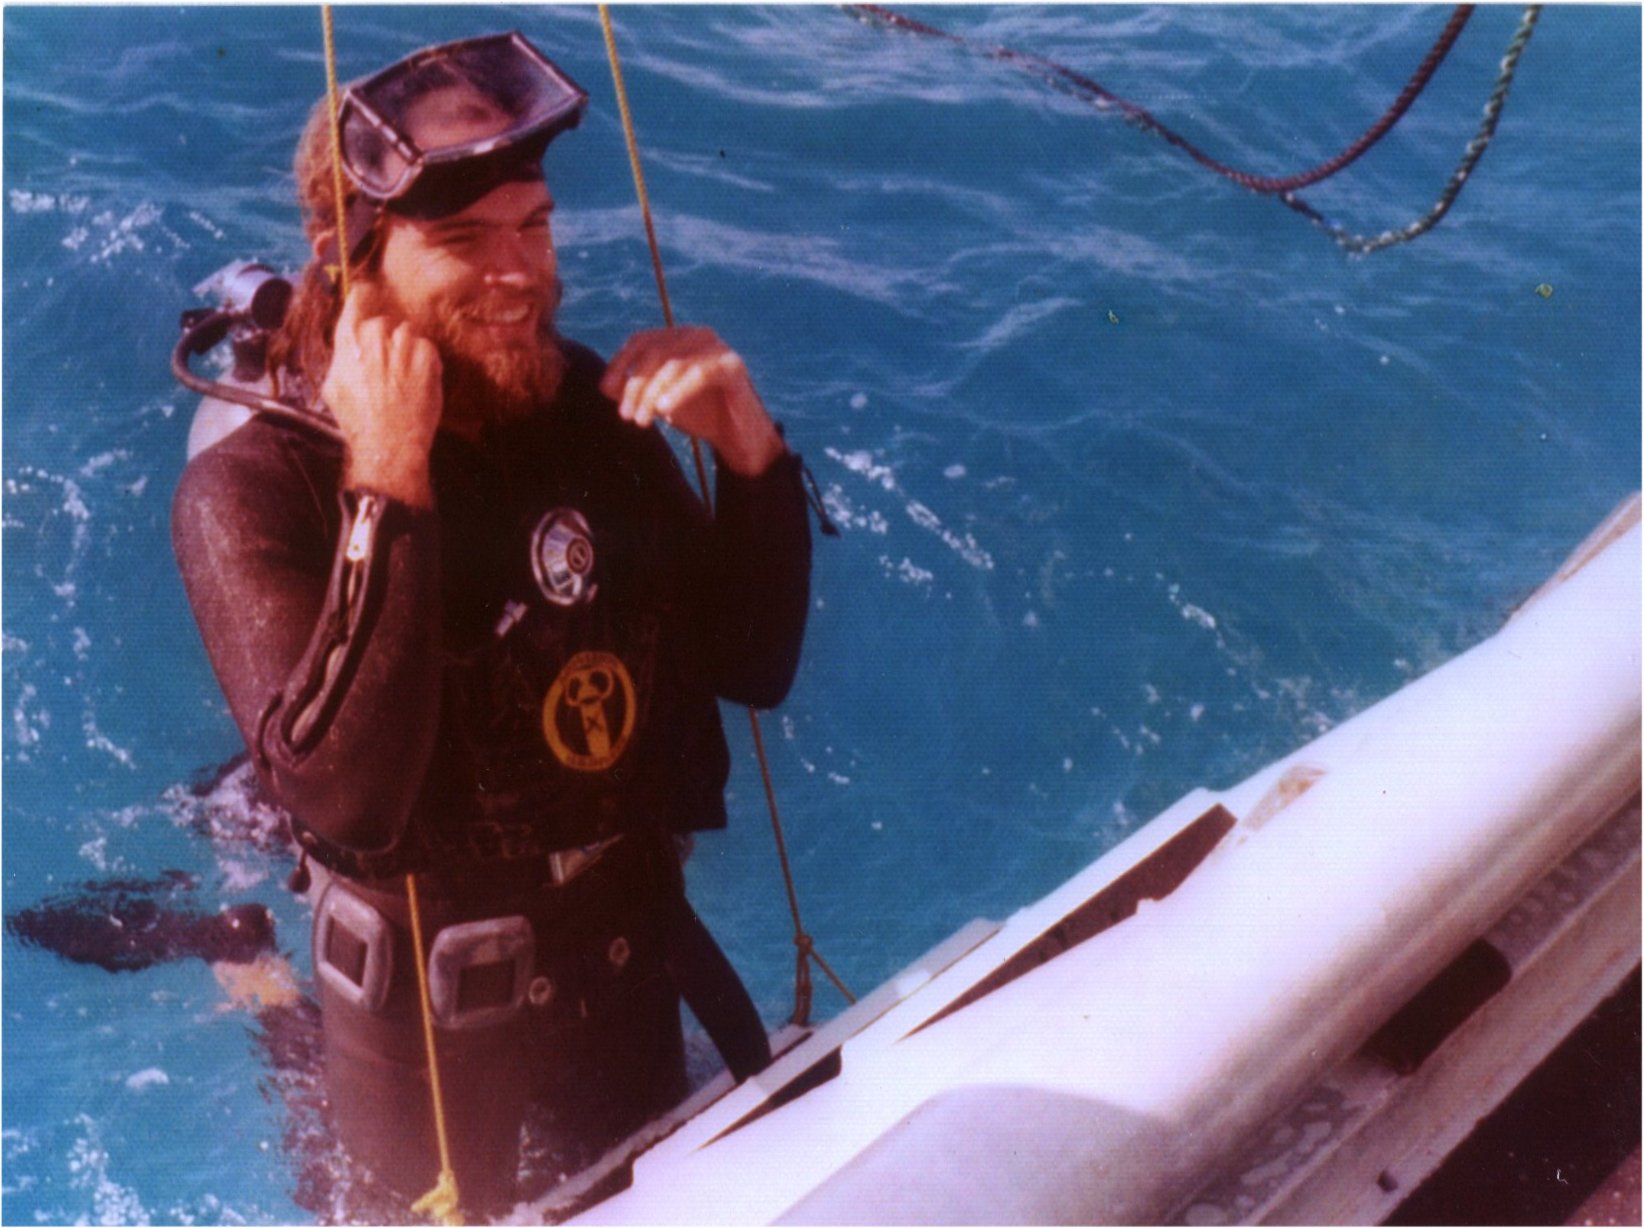 Bernard boards R/V Beta while diving in the Caribbean